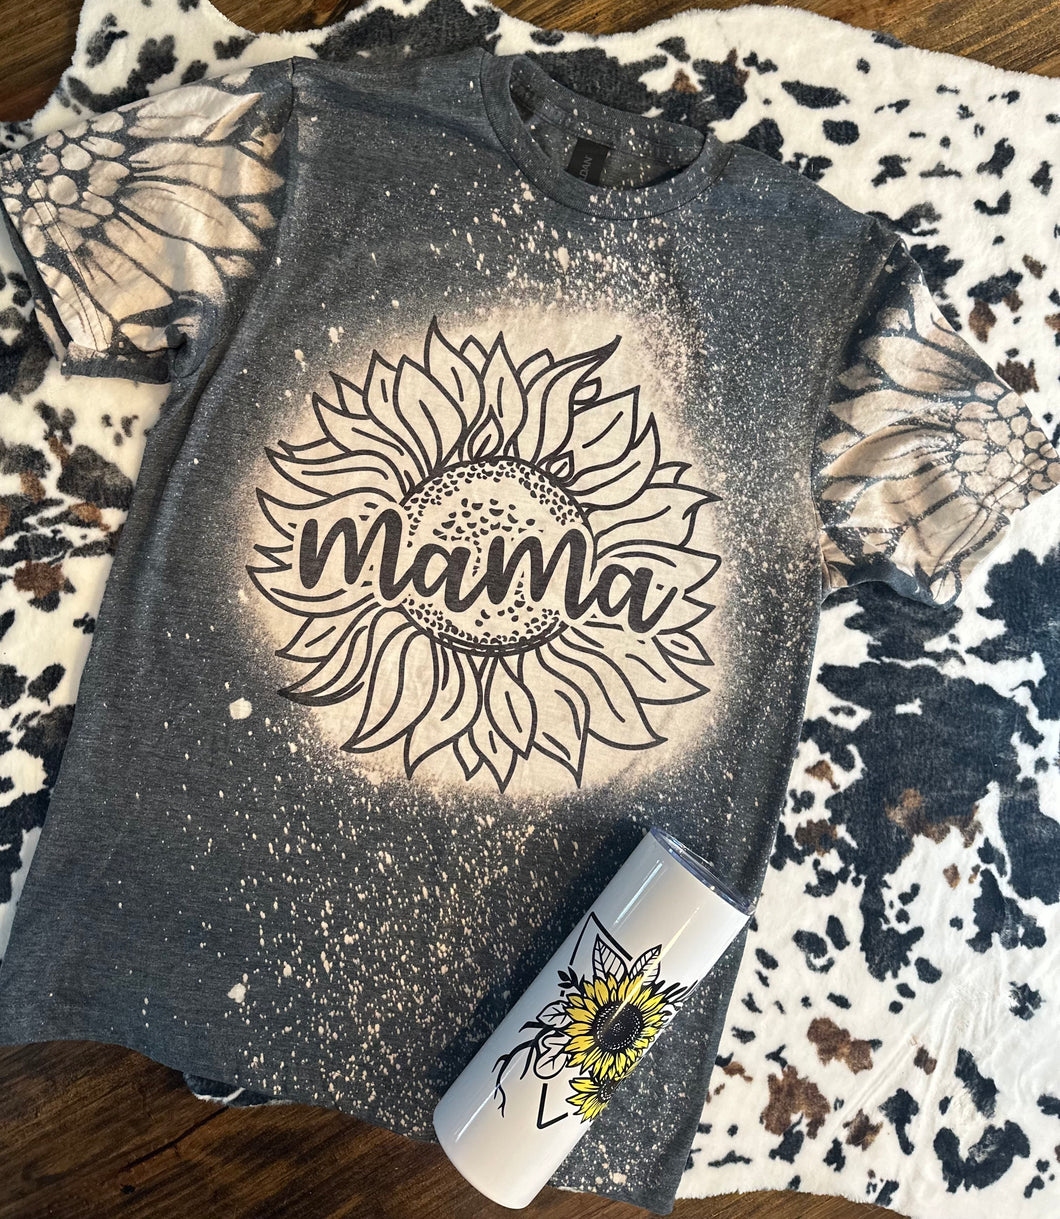 Bleached mama sunflowers with added sunflower sleeves graphic tee - Mavictoria Designs Hot Press Express